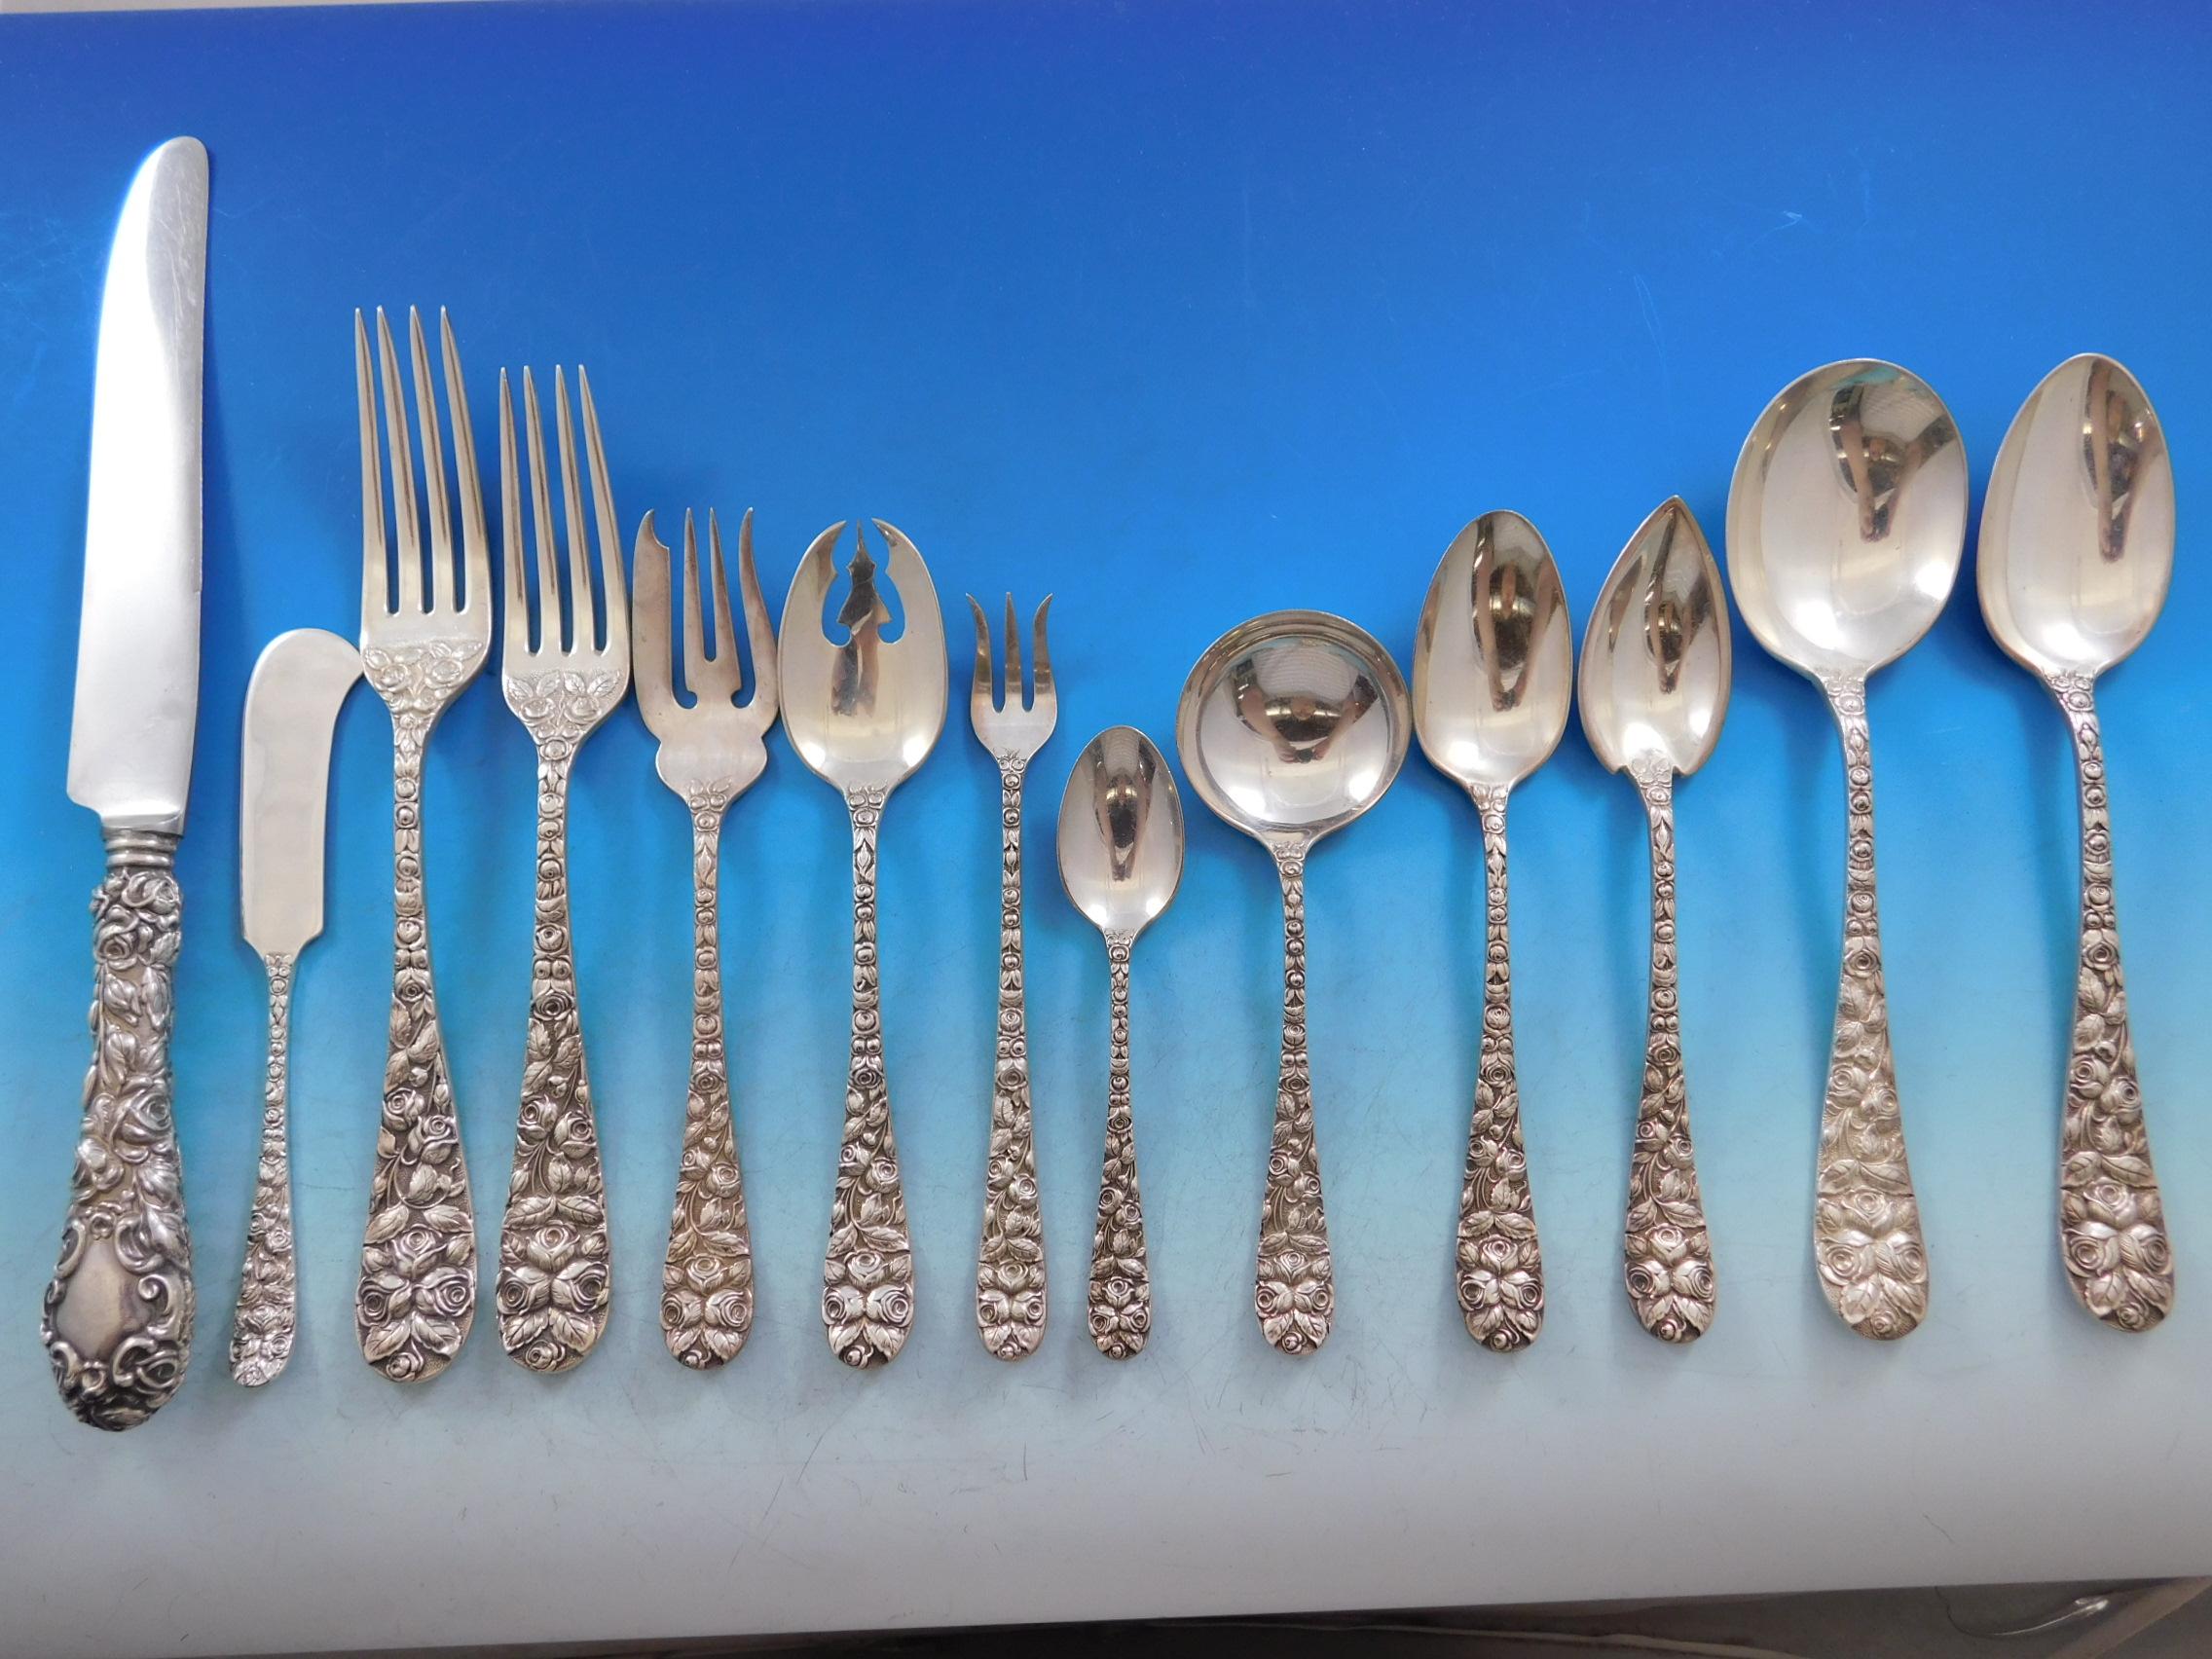 Superb monumental Baltimore Rose by Schofield sterling silver flatware set - 189 pieces. This repoussed pattern was designed by Frank Schofield and was introduced in the year 1905. Schofield's most famous and most desirable pattern was Baltimore